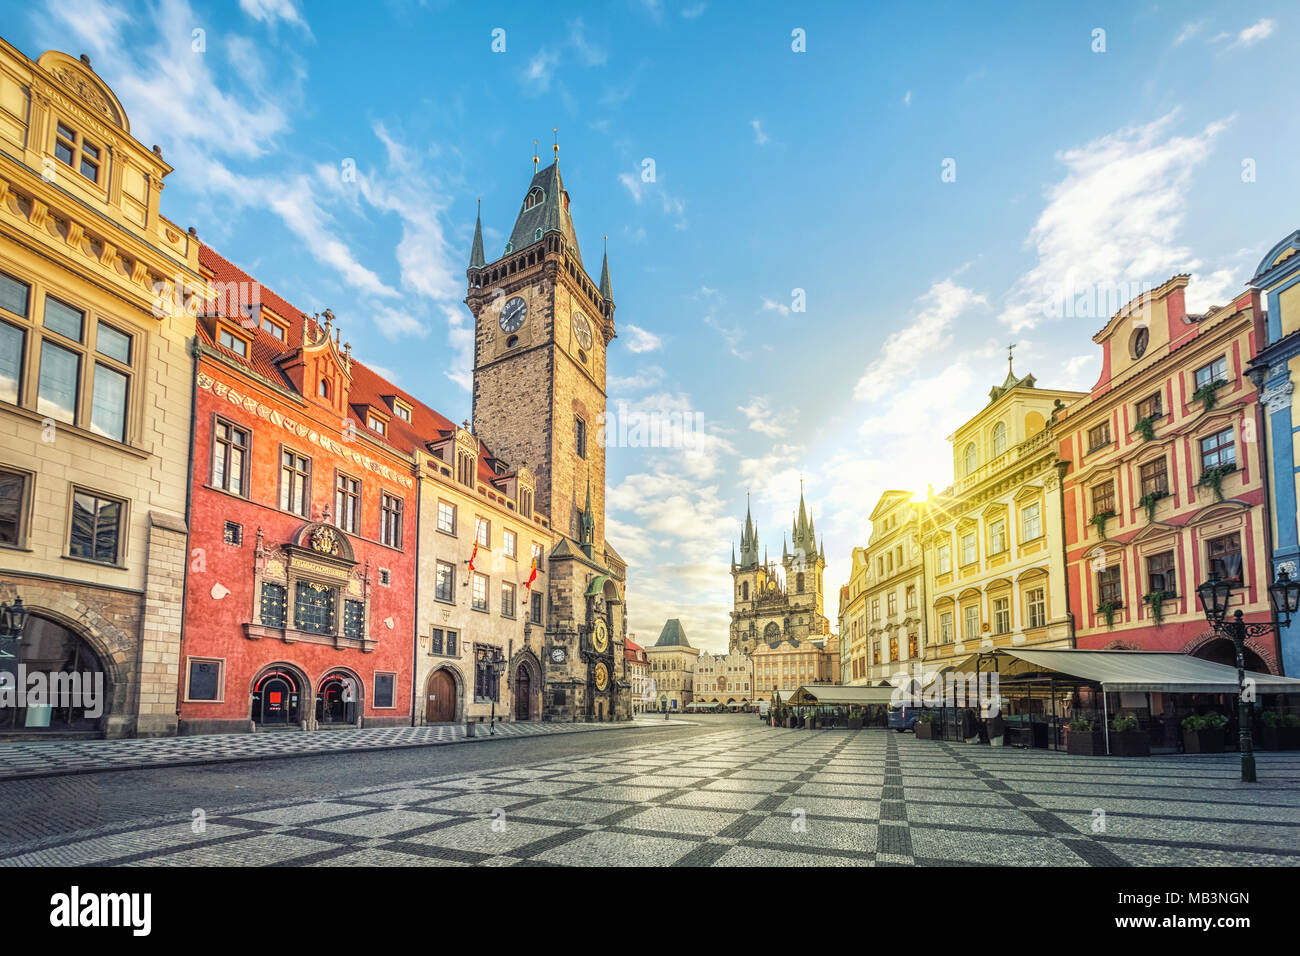 Old Town Hall building with clock tower on Old Town square (Staromestske namesti) in the morning, Prague, Czech Republic Stock Photo